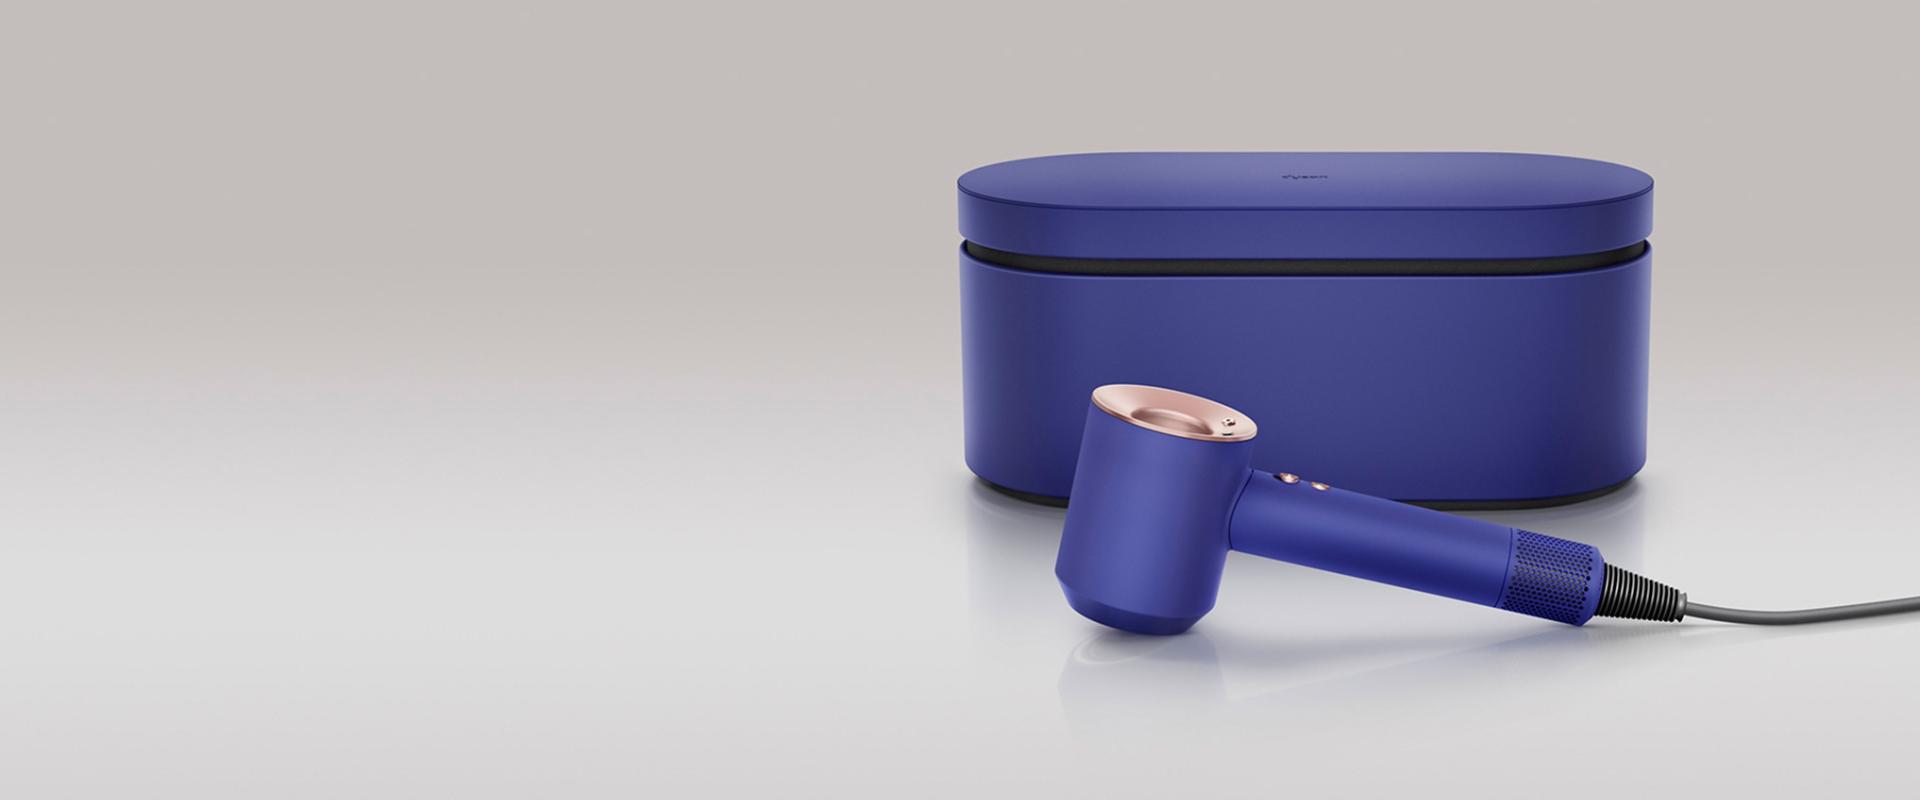 Dyson Supersonic hair dryer in Vinca blue and Rosé with presentation case.